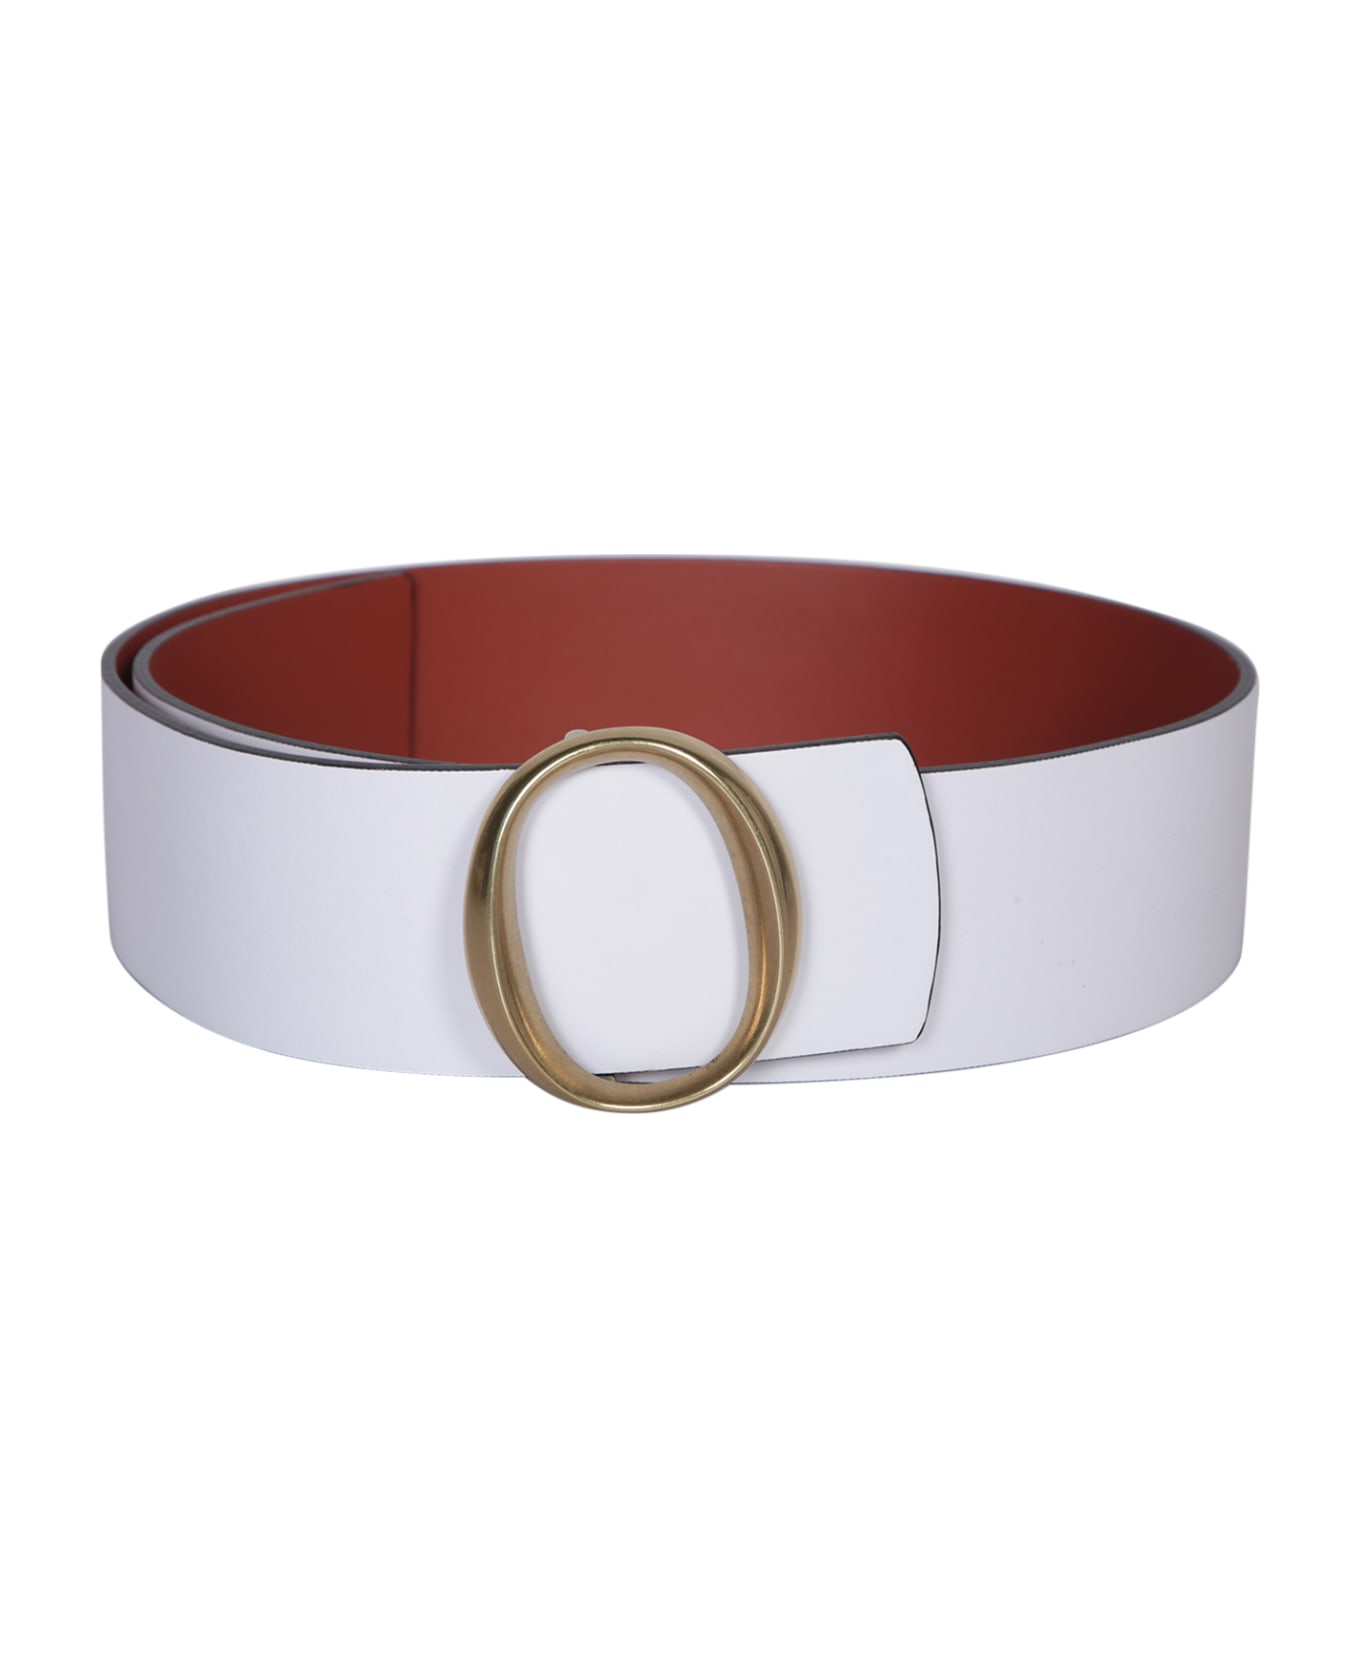 Orciani Soft Double Brown/white Belt - Brown